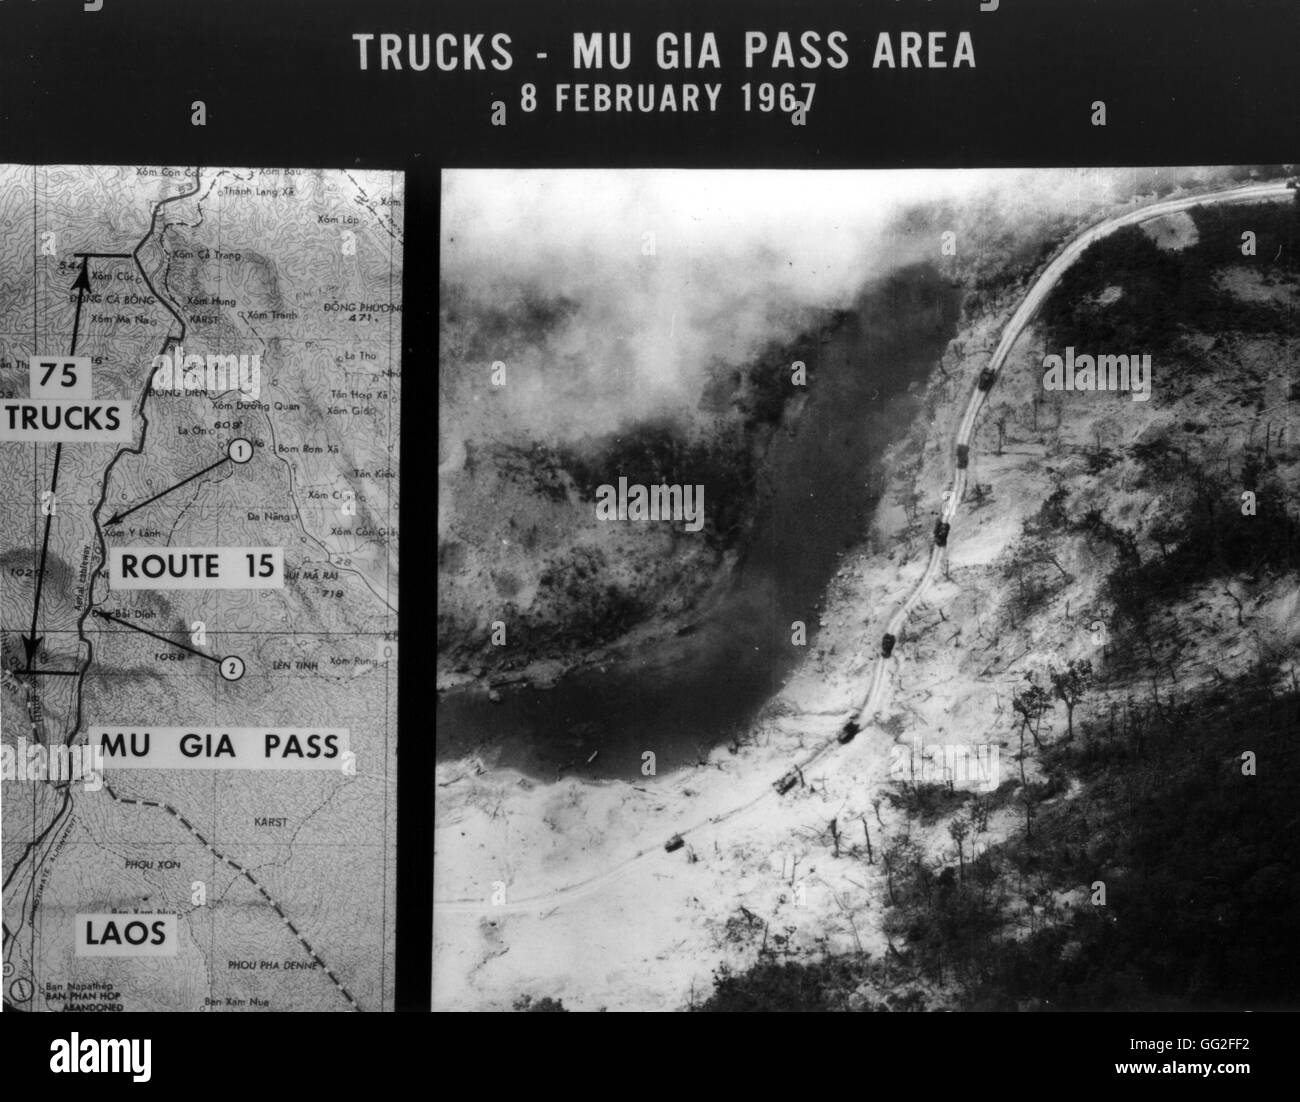 The Mu Gia Pass, located near the Annamite chain, separates Vietnam from the lakes. On February 8, 1967, many trucks were spotted heading South on Route 15, towards Mu Gia Pass. The picture shows seven of these trucks moving on a difficult path. February Stock Photo